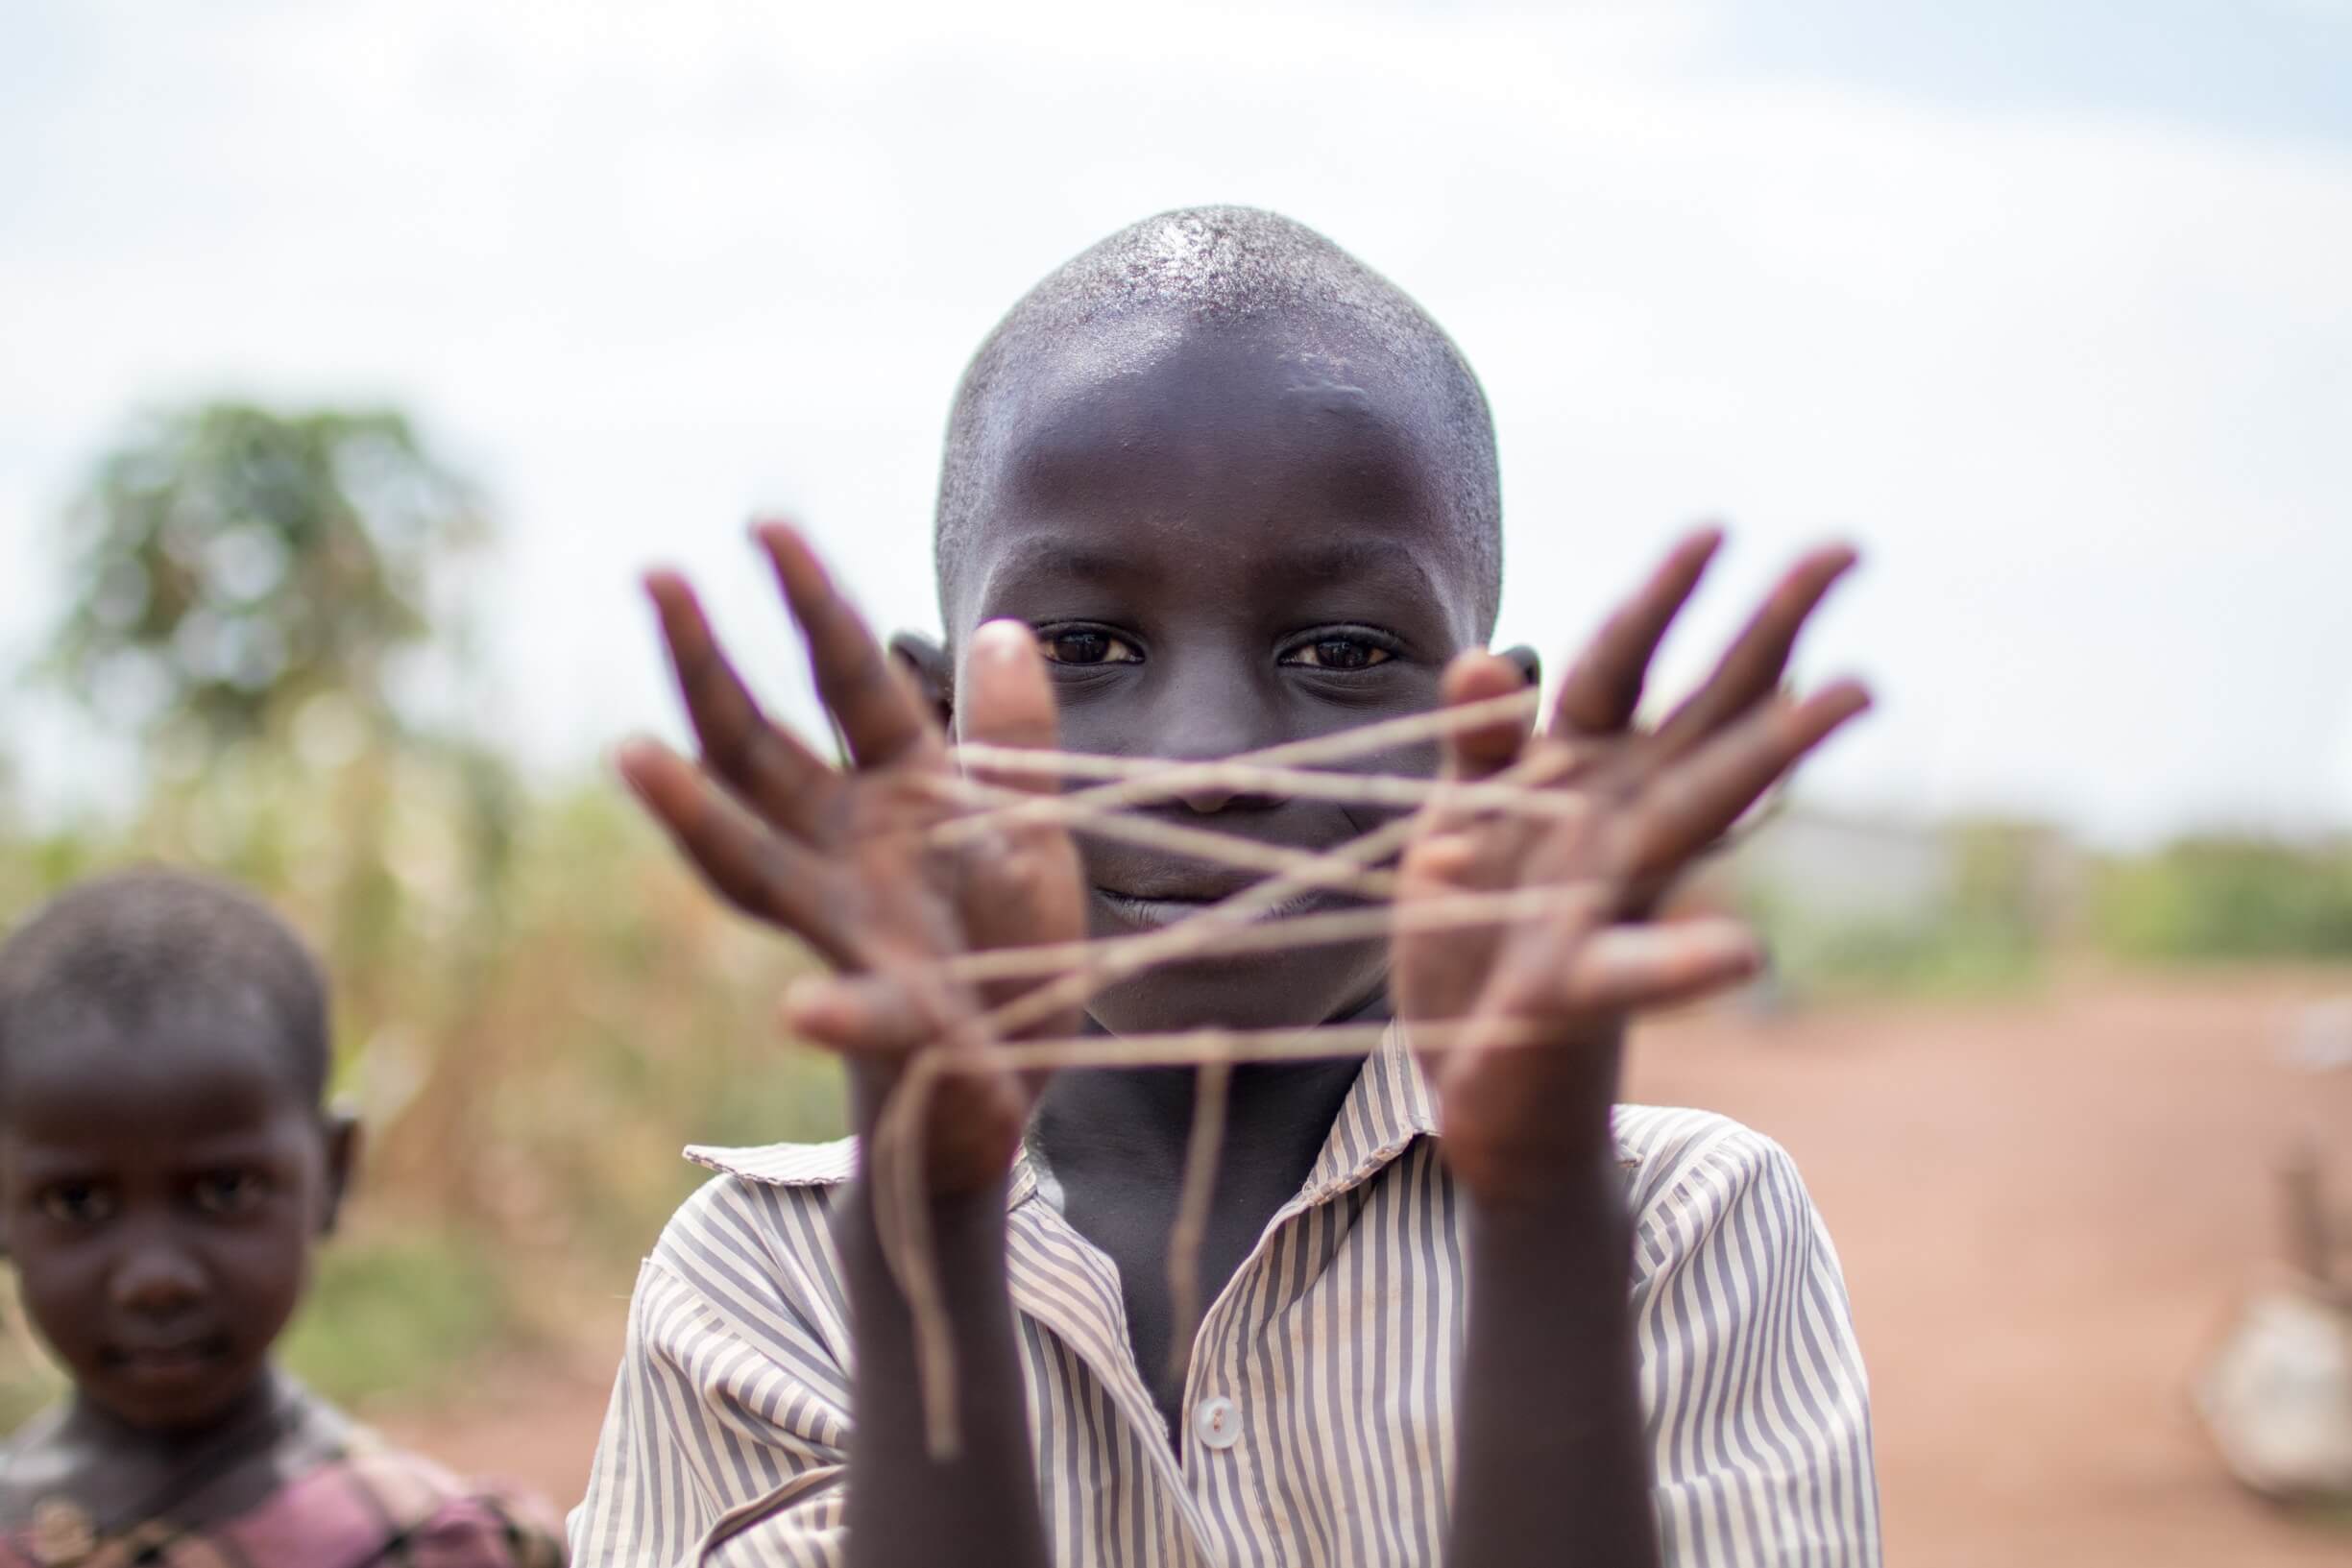 Boy Smiling While Showing Hand String Game